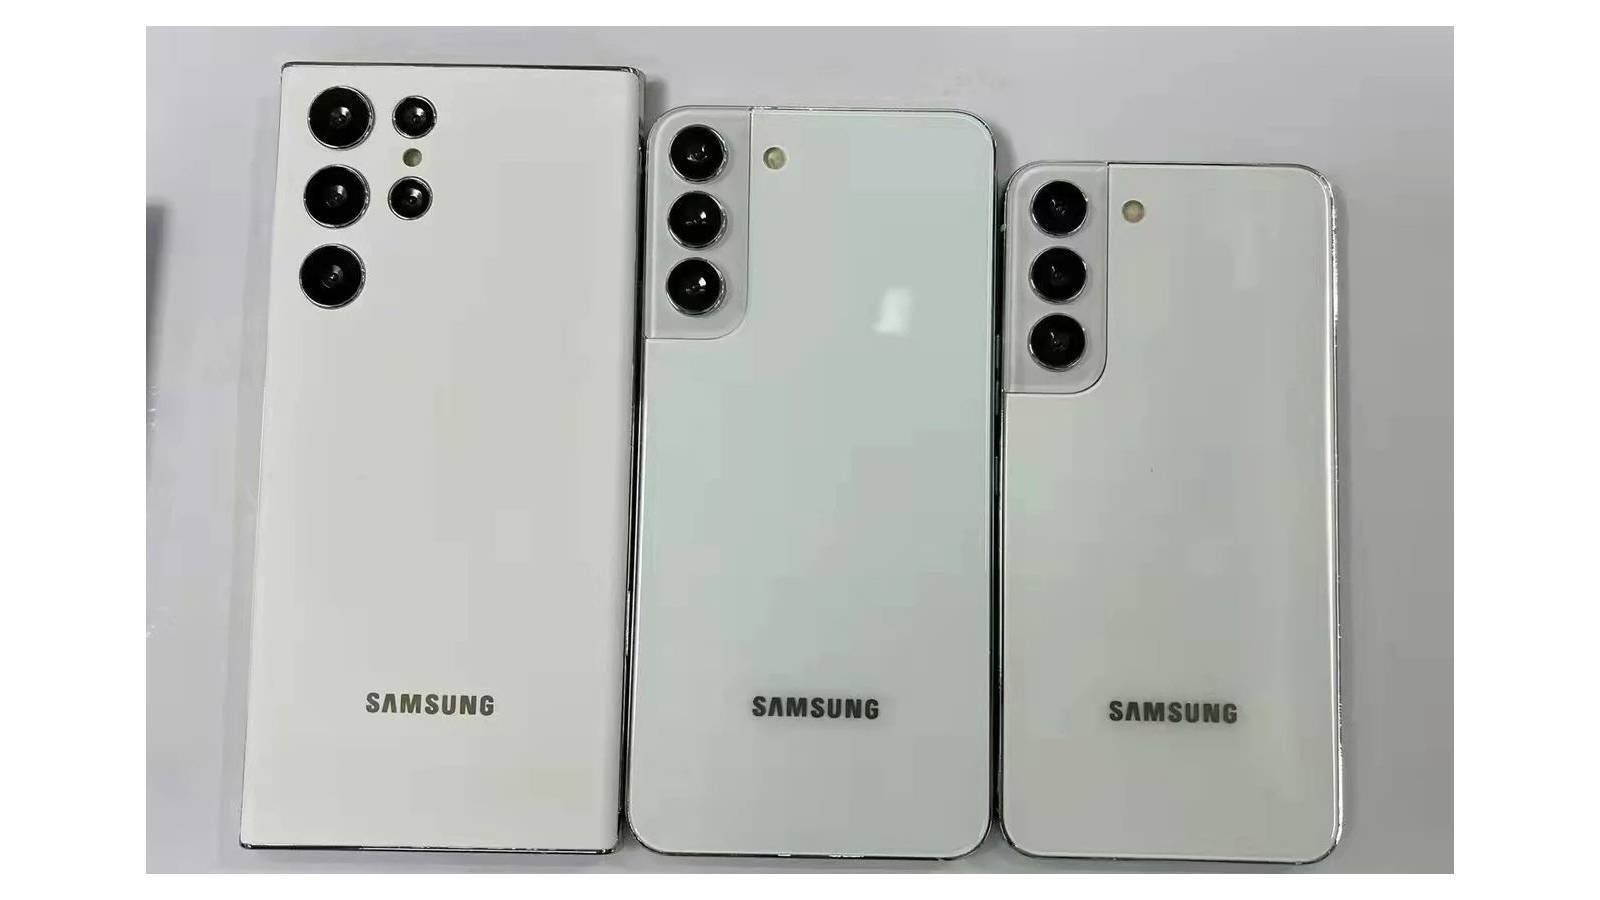 Galaxy S22 series dummy units in White - Realistic-looking Galaxy S22, S22+, and S22 Note dummies highlight their stark differences